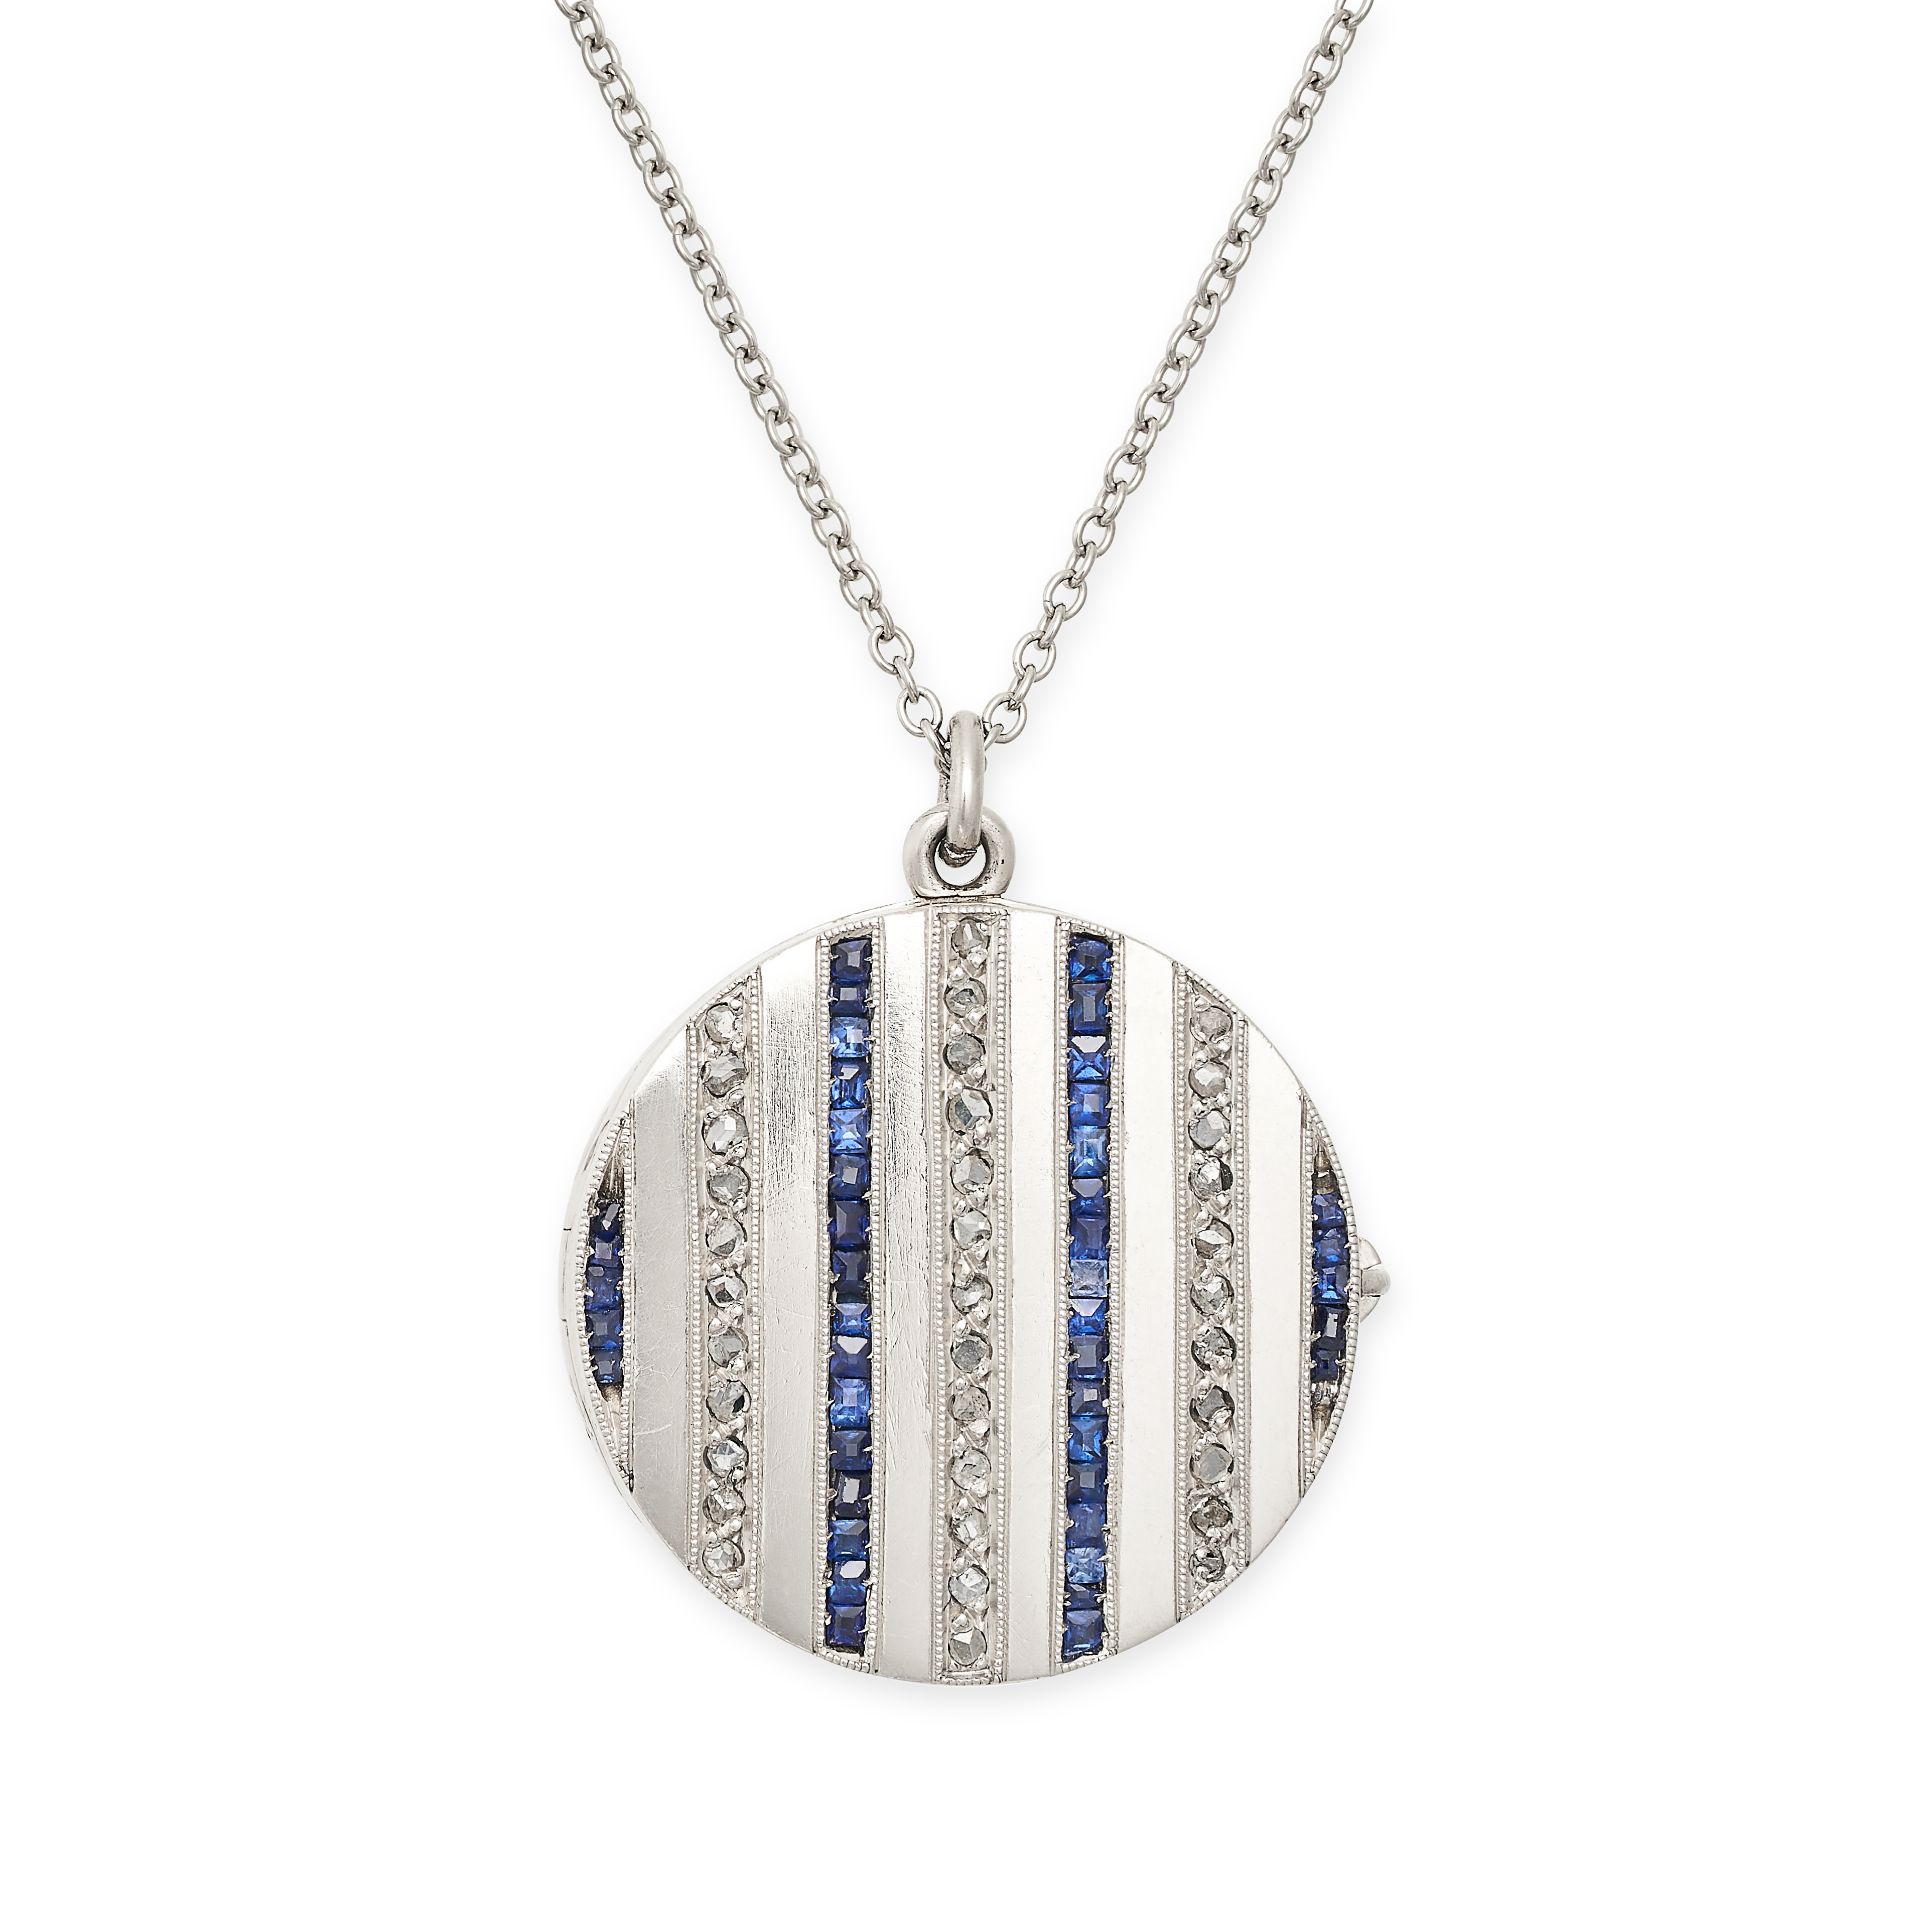 A SAPPHIRE AND DIAMOND LOCKET AND CHAIN the circular locket set with alternating rows of rose cut